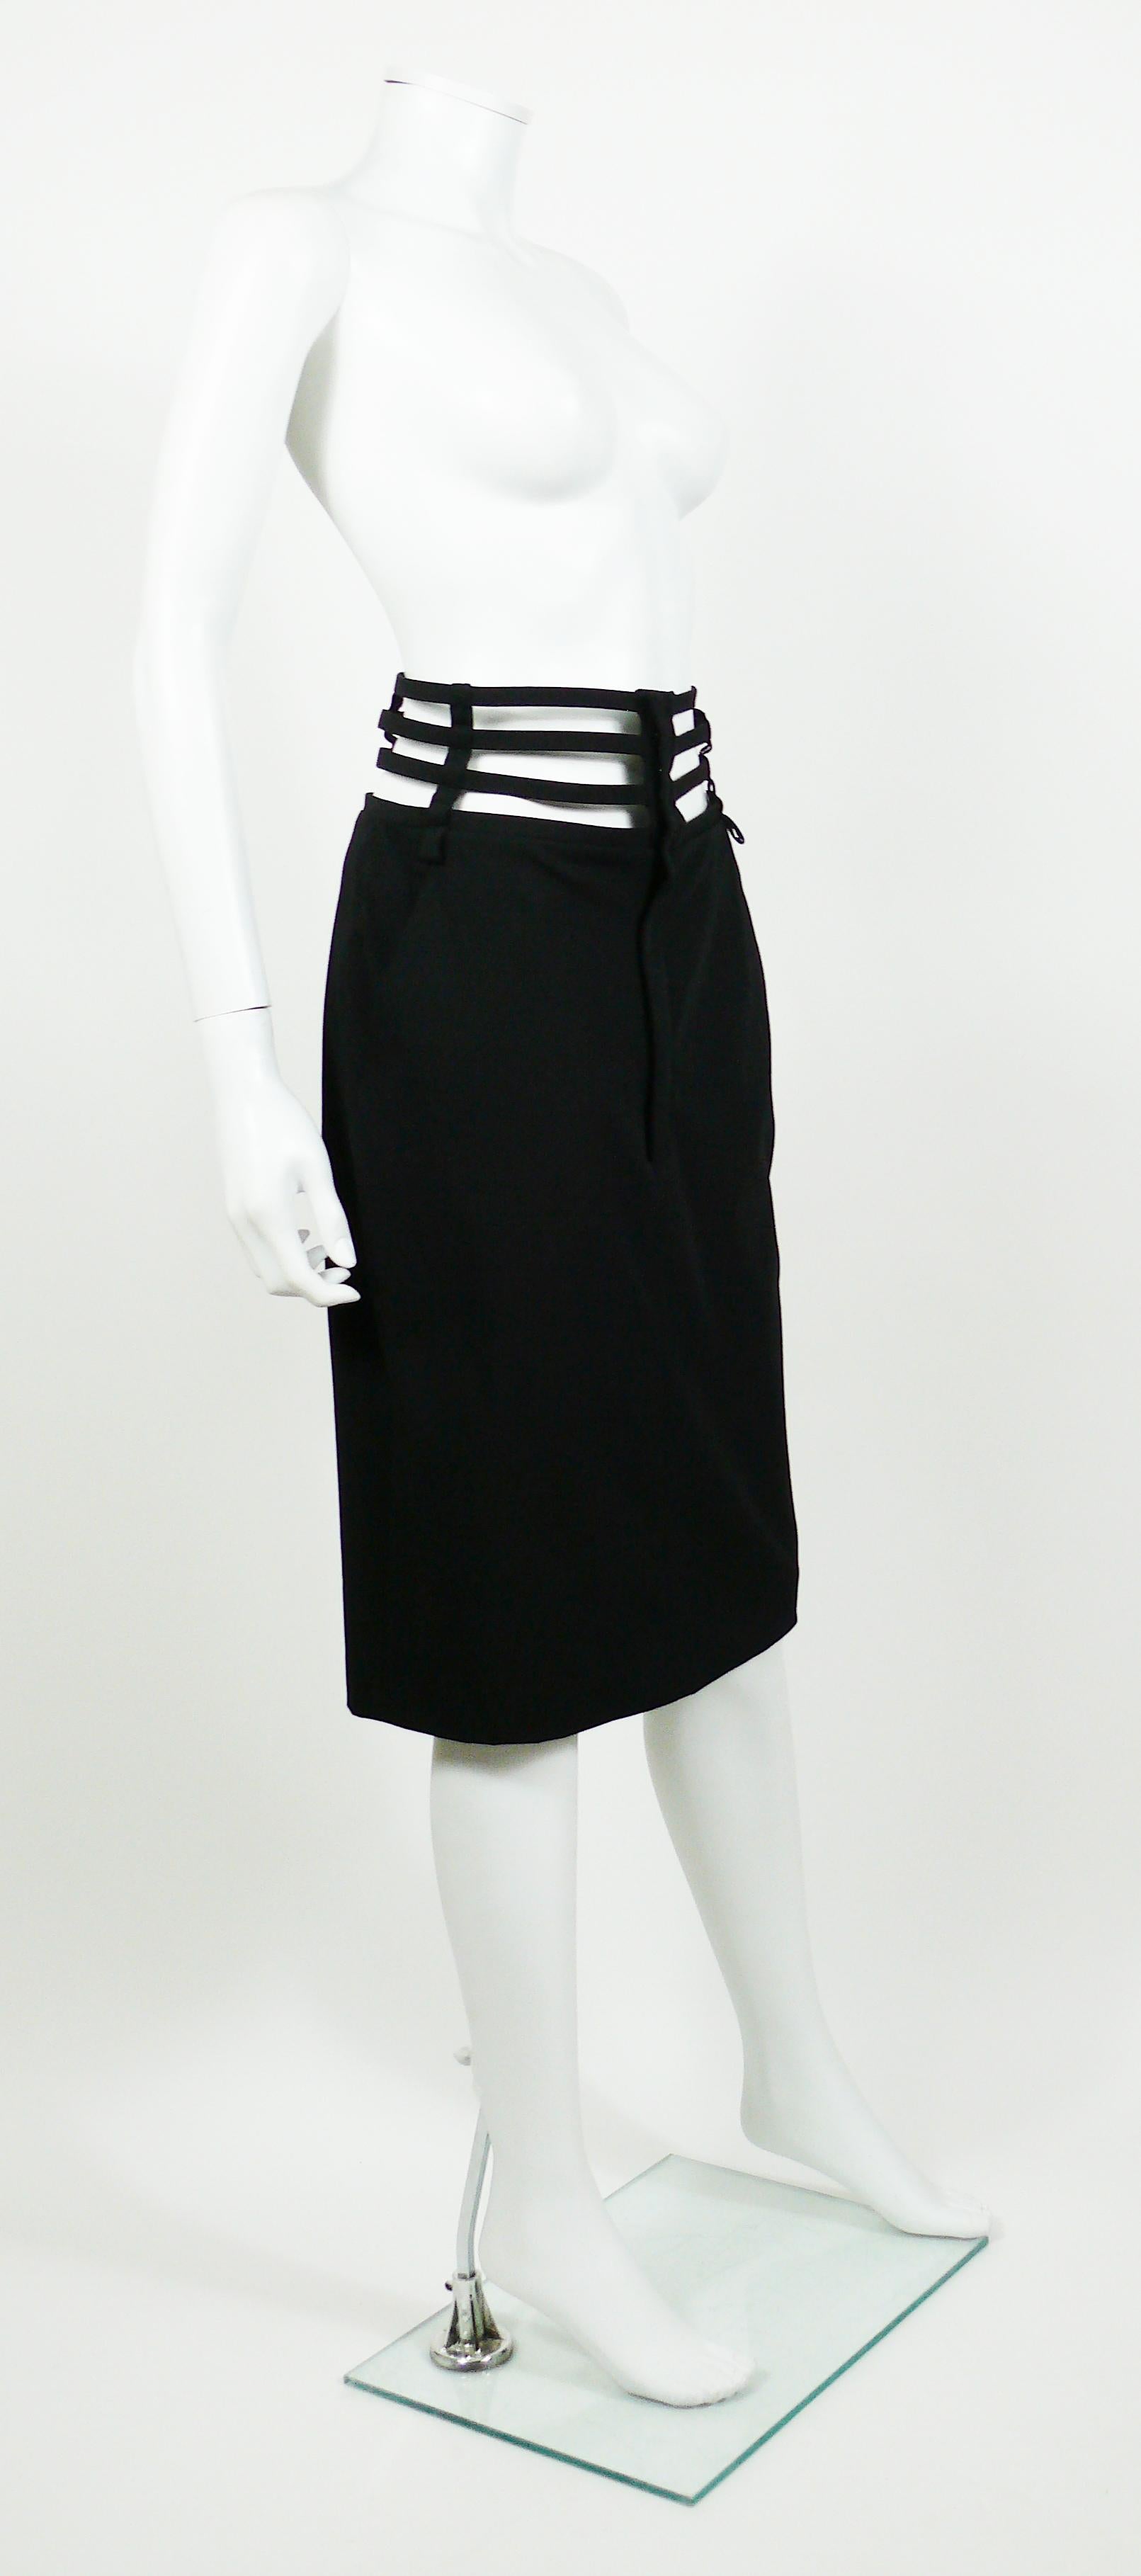 JEAN PAUL GAULTIER iconic black skirt with caging around the waist.

This skirt features :
- Knee length.
- Side pockets.
- Zip and snap closure at front.
- Belt loops.
- Stretchy fabric.
- Unlined.

Label reads JEAN PAUL GAULTIER Femme.
Made in